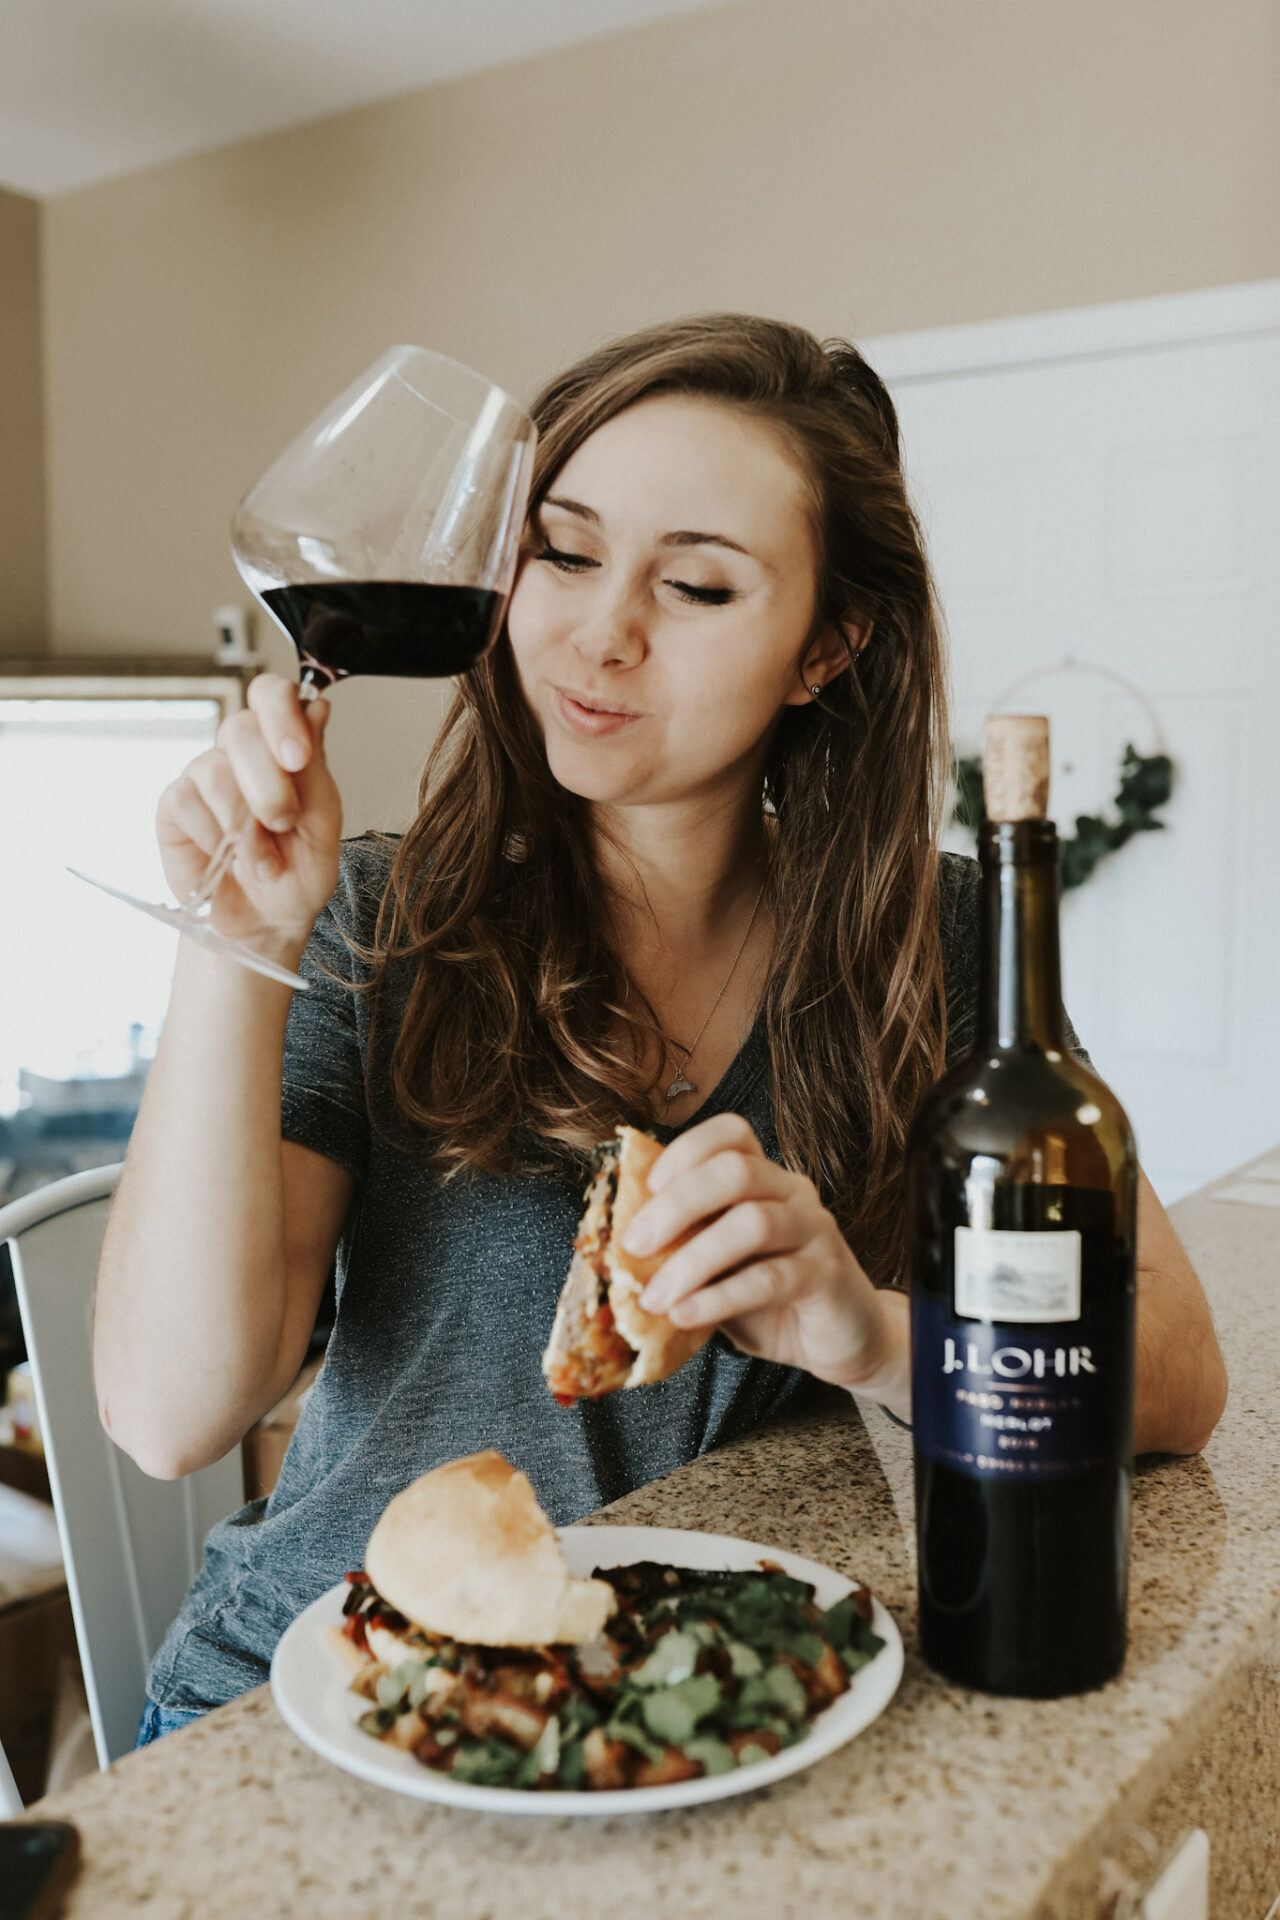 Paige drinking J. Lohr Merlot and eating BBQ Bacon Cheeseburger